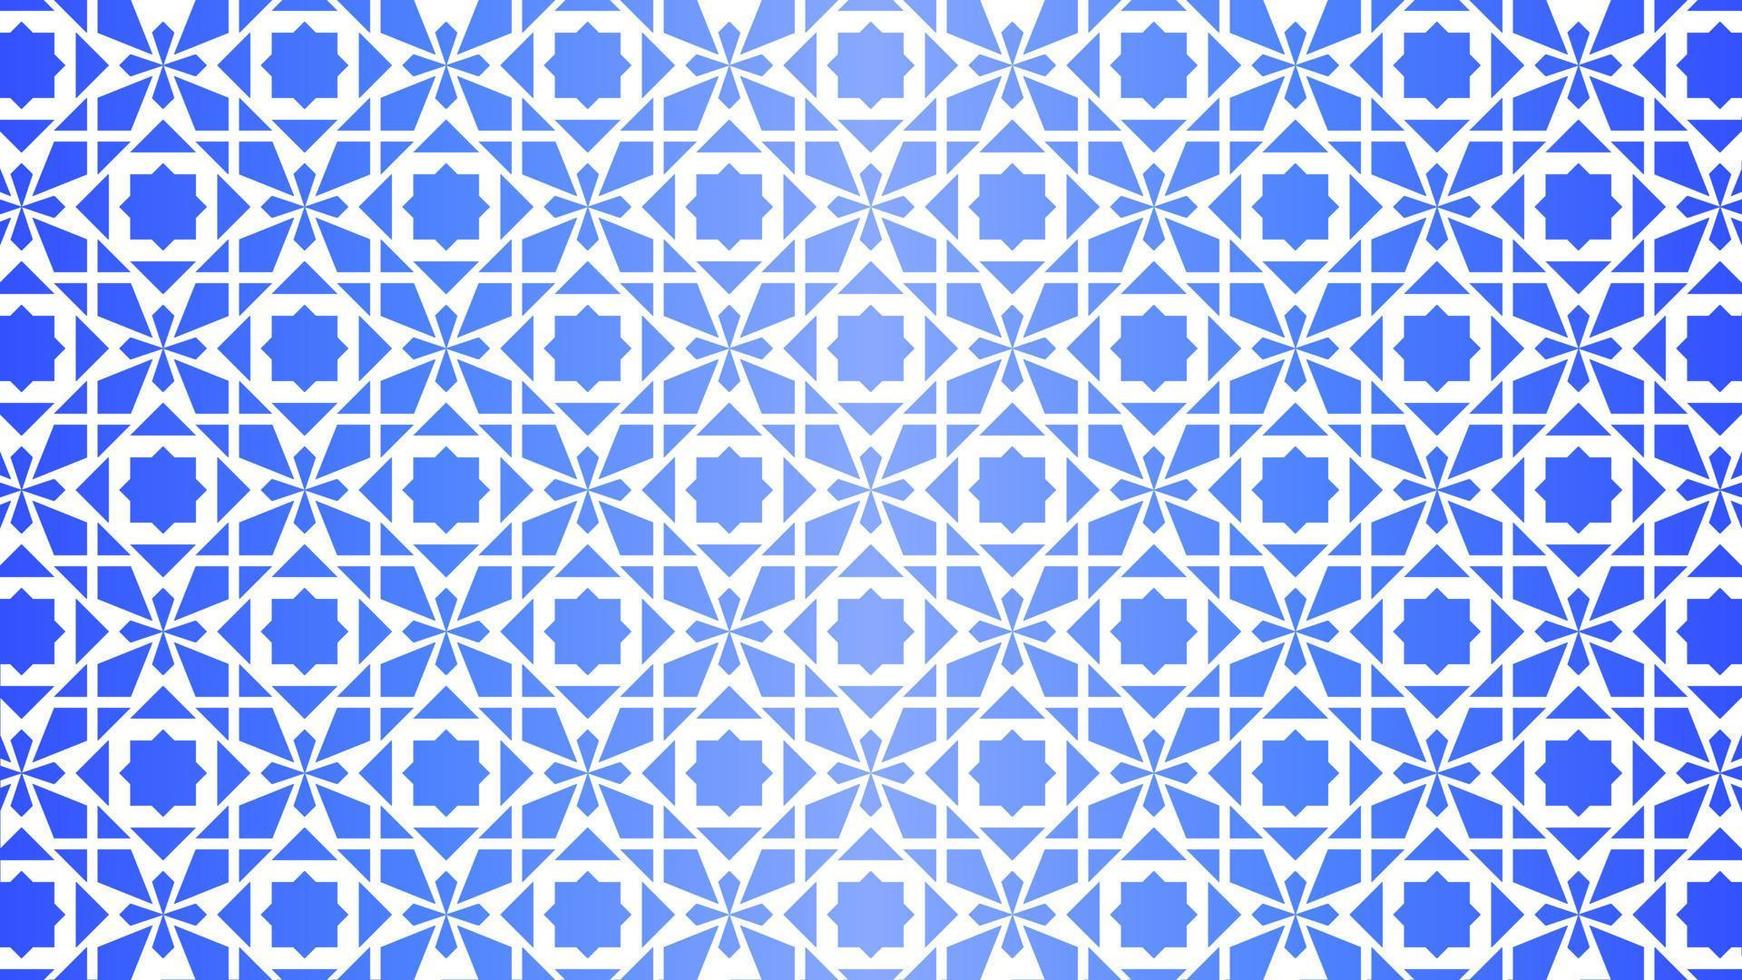 Seamless pattern of floral islamic art with blue color for ramadan design graphic in muslim culture and islam religion. Vector pattern that normally used for mosque ornamen or islamic design